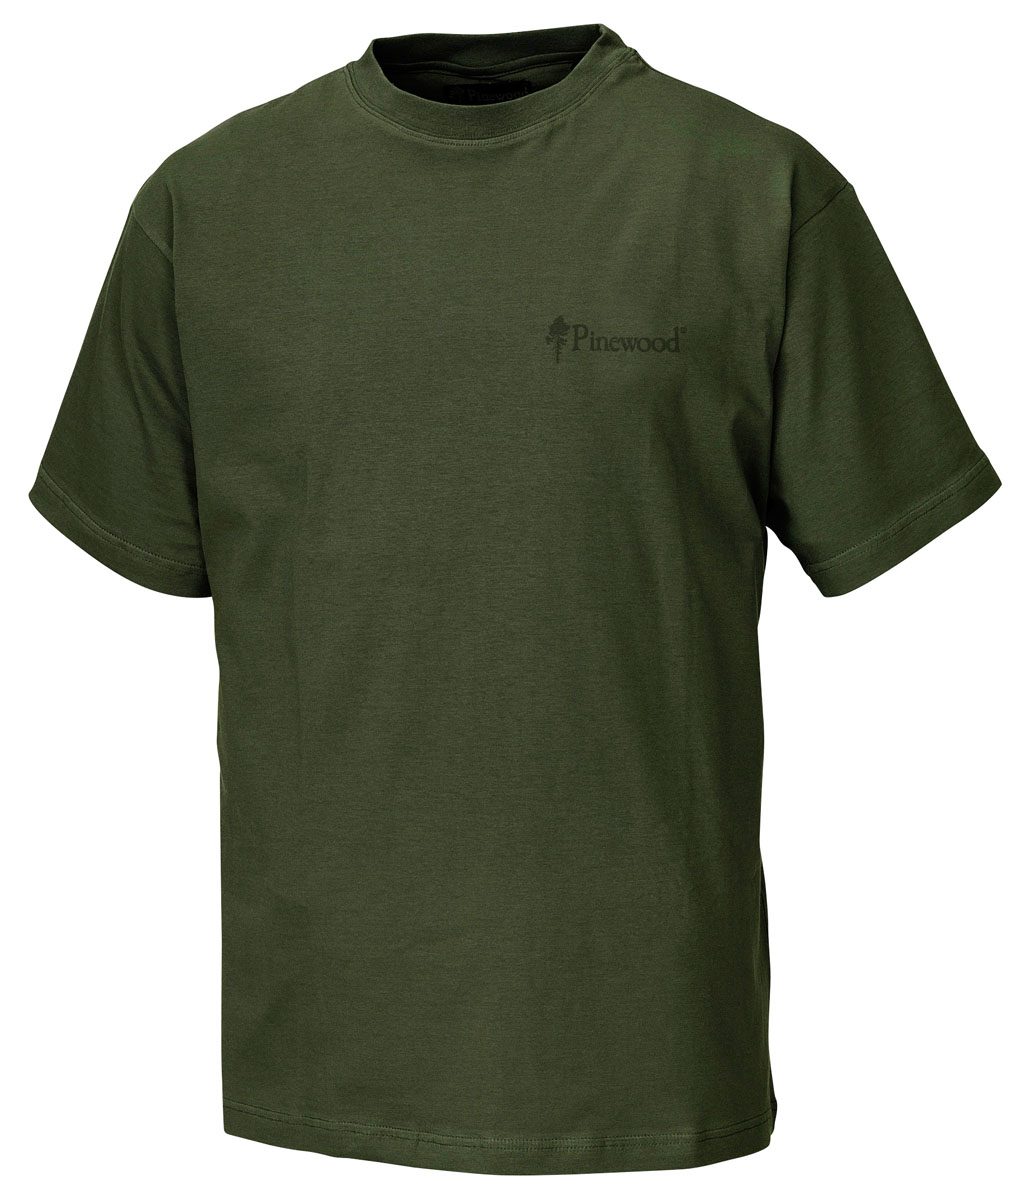 Pinewood T-Shirt 2-er Pack in der Farbe Green